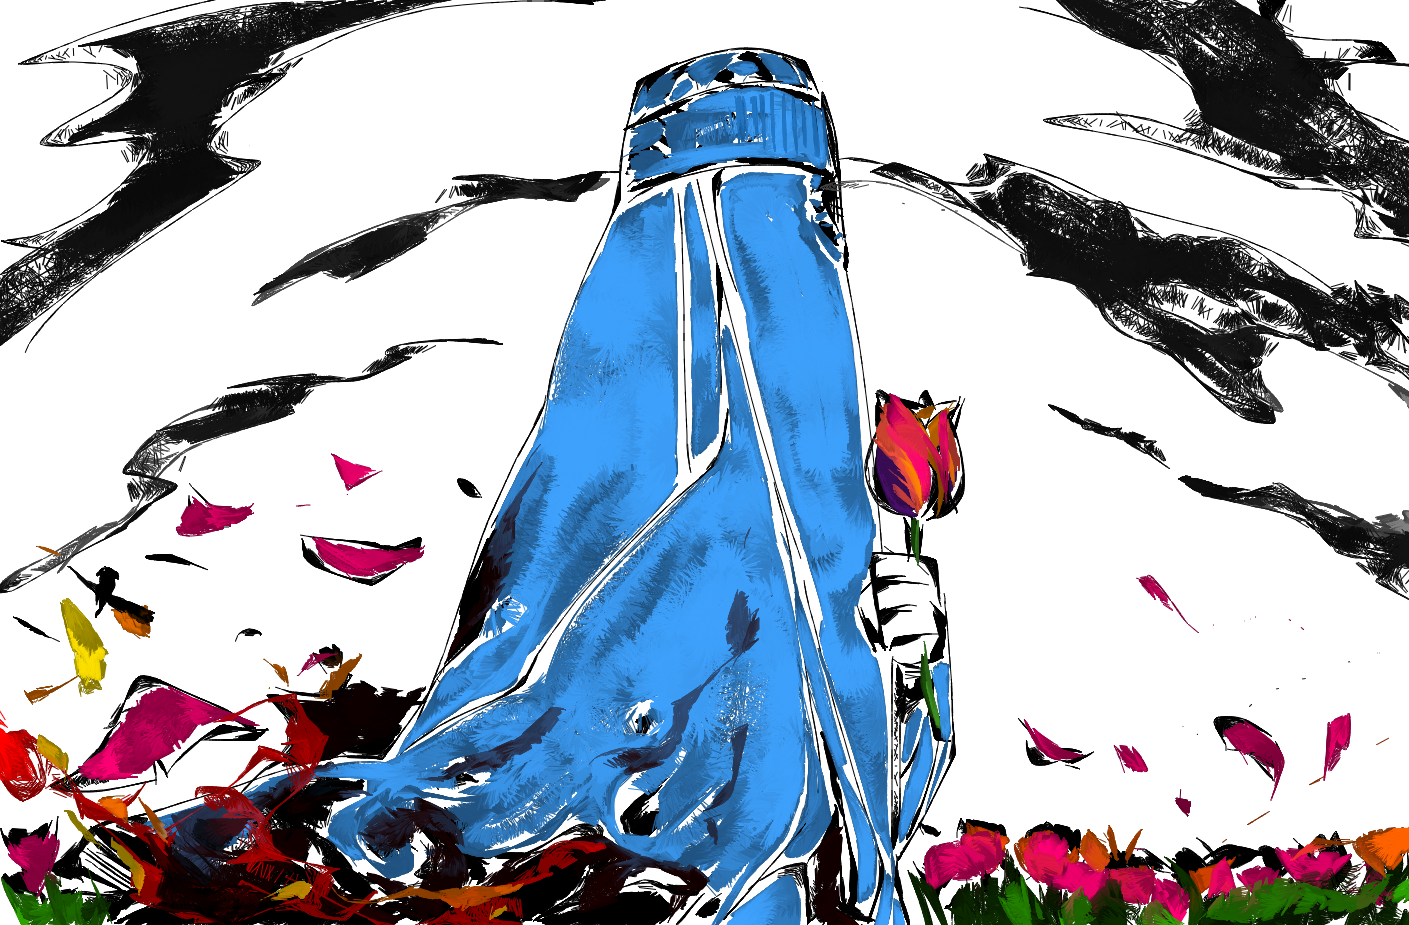 Illustration of a woman in a blue burqa holding a rose. She is standing in a field of red flowers. The bottom of her burqa is on fire and the fire blends into the red and orange flowers around her. The background is bright white with indications of a smoky sky.